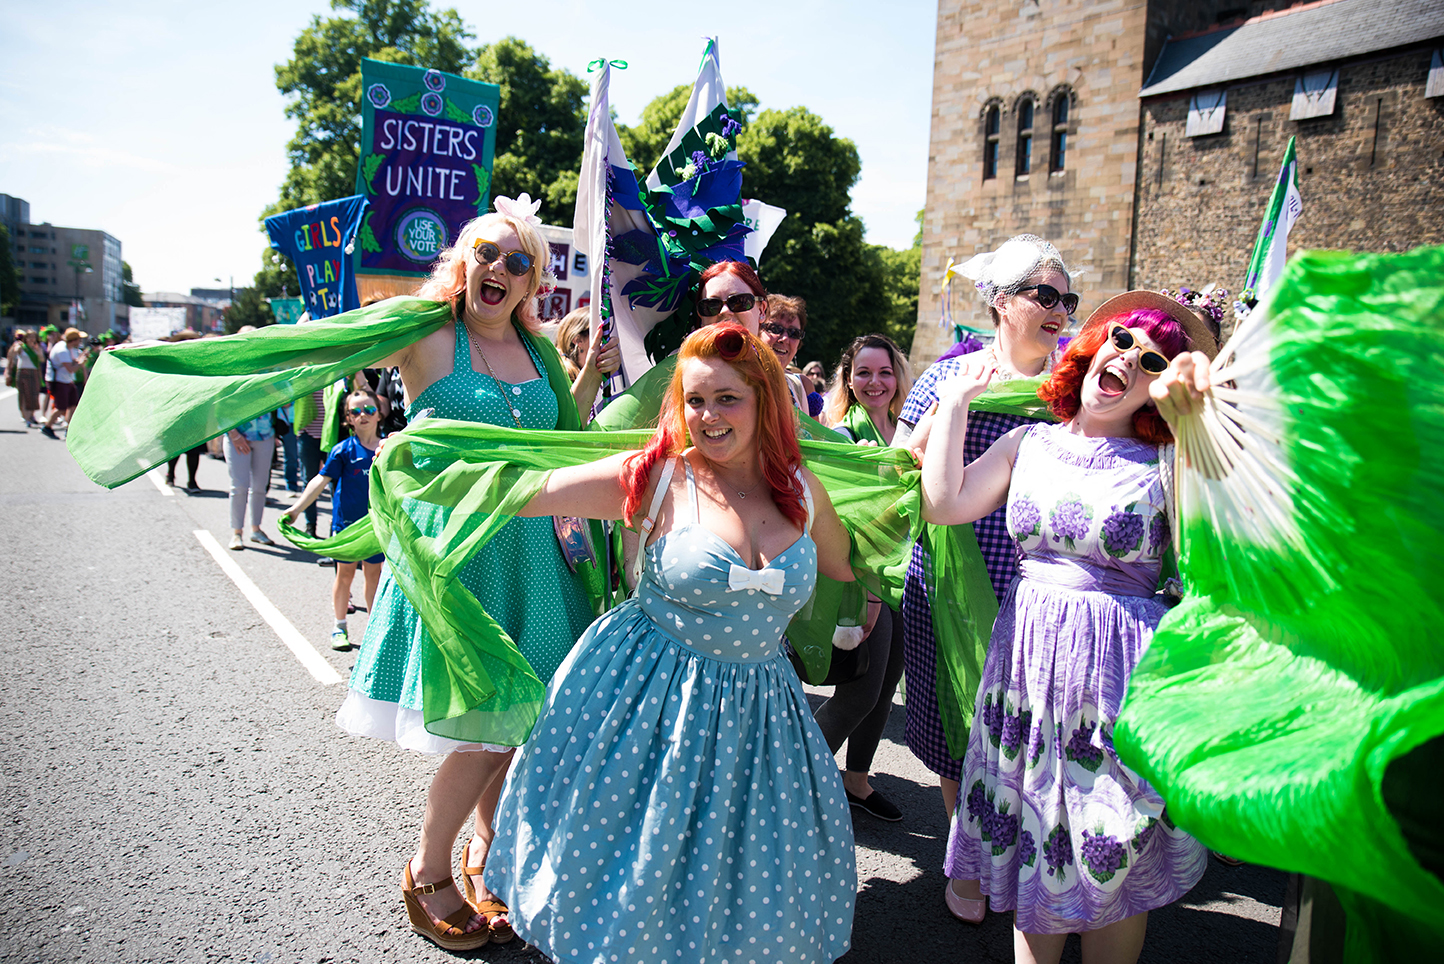 Group of women with green sashes and a green fan smiling at the camera in the midst of the Procession in Cardiff